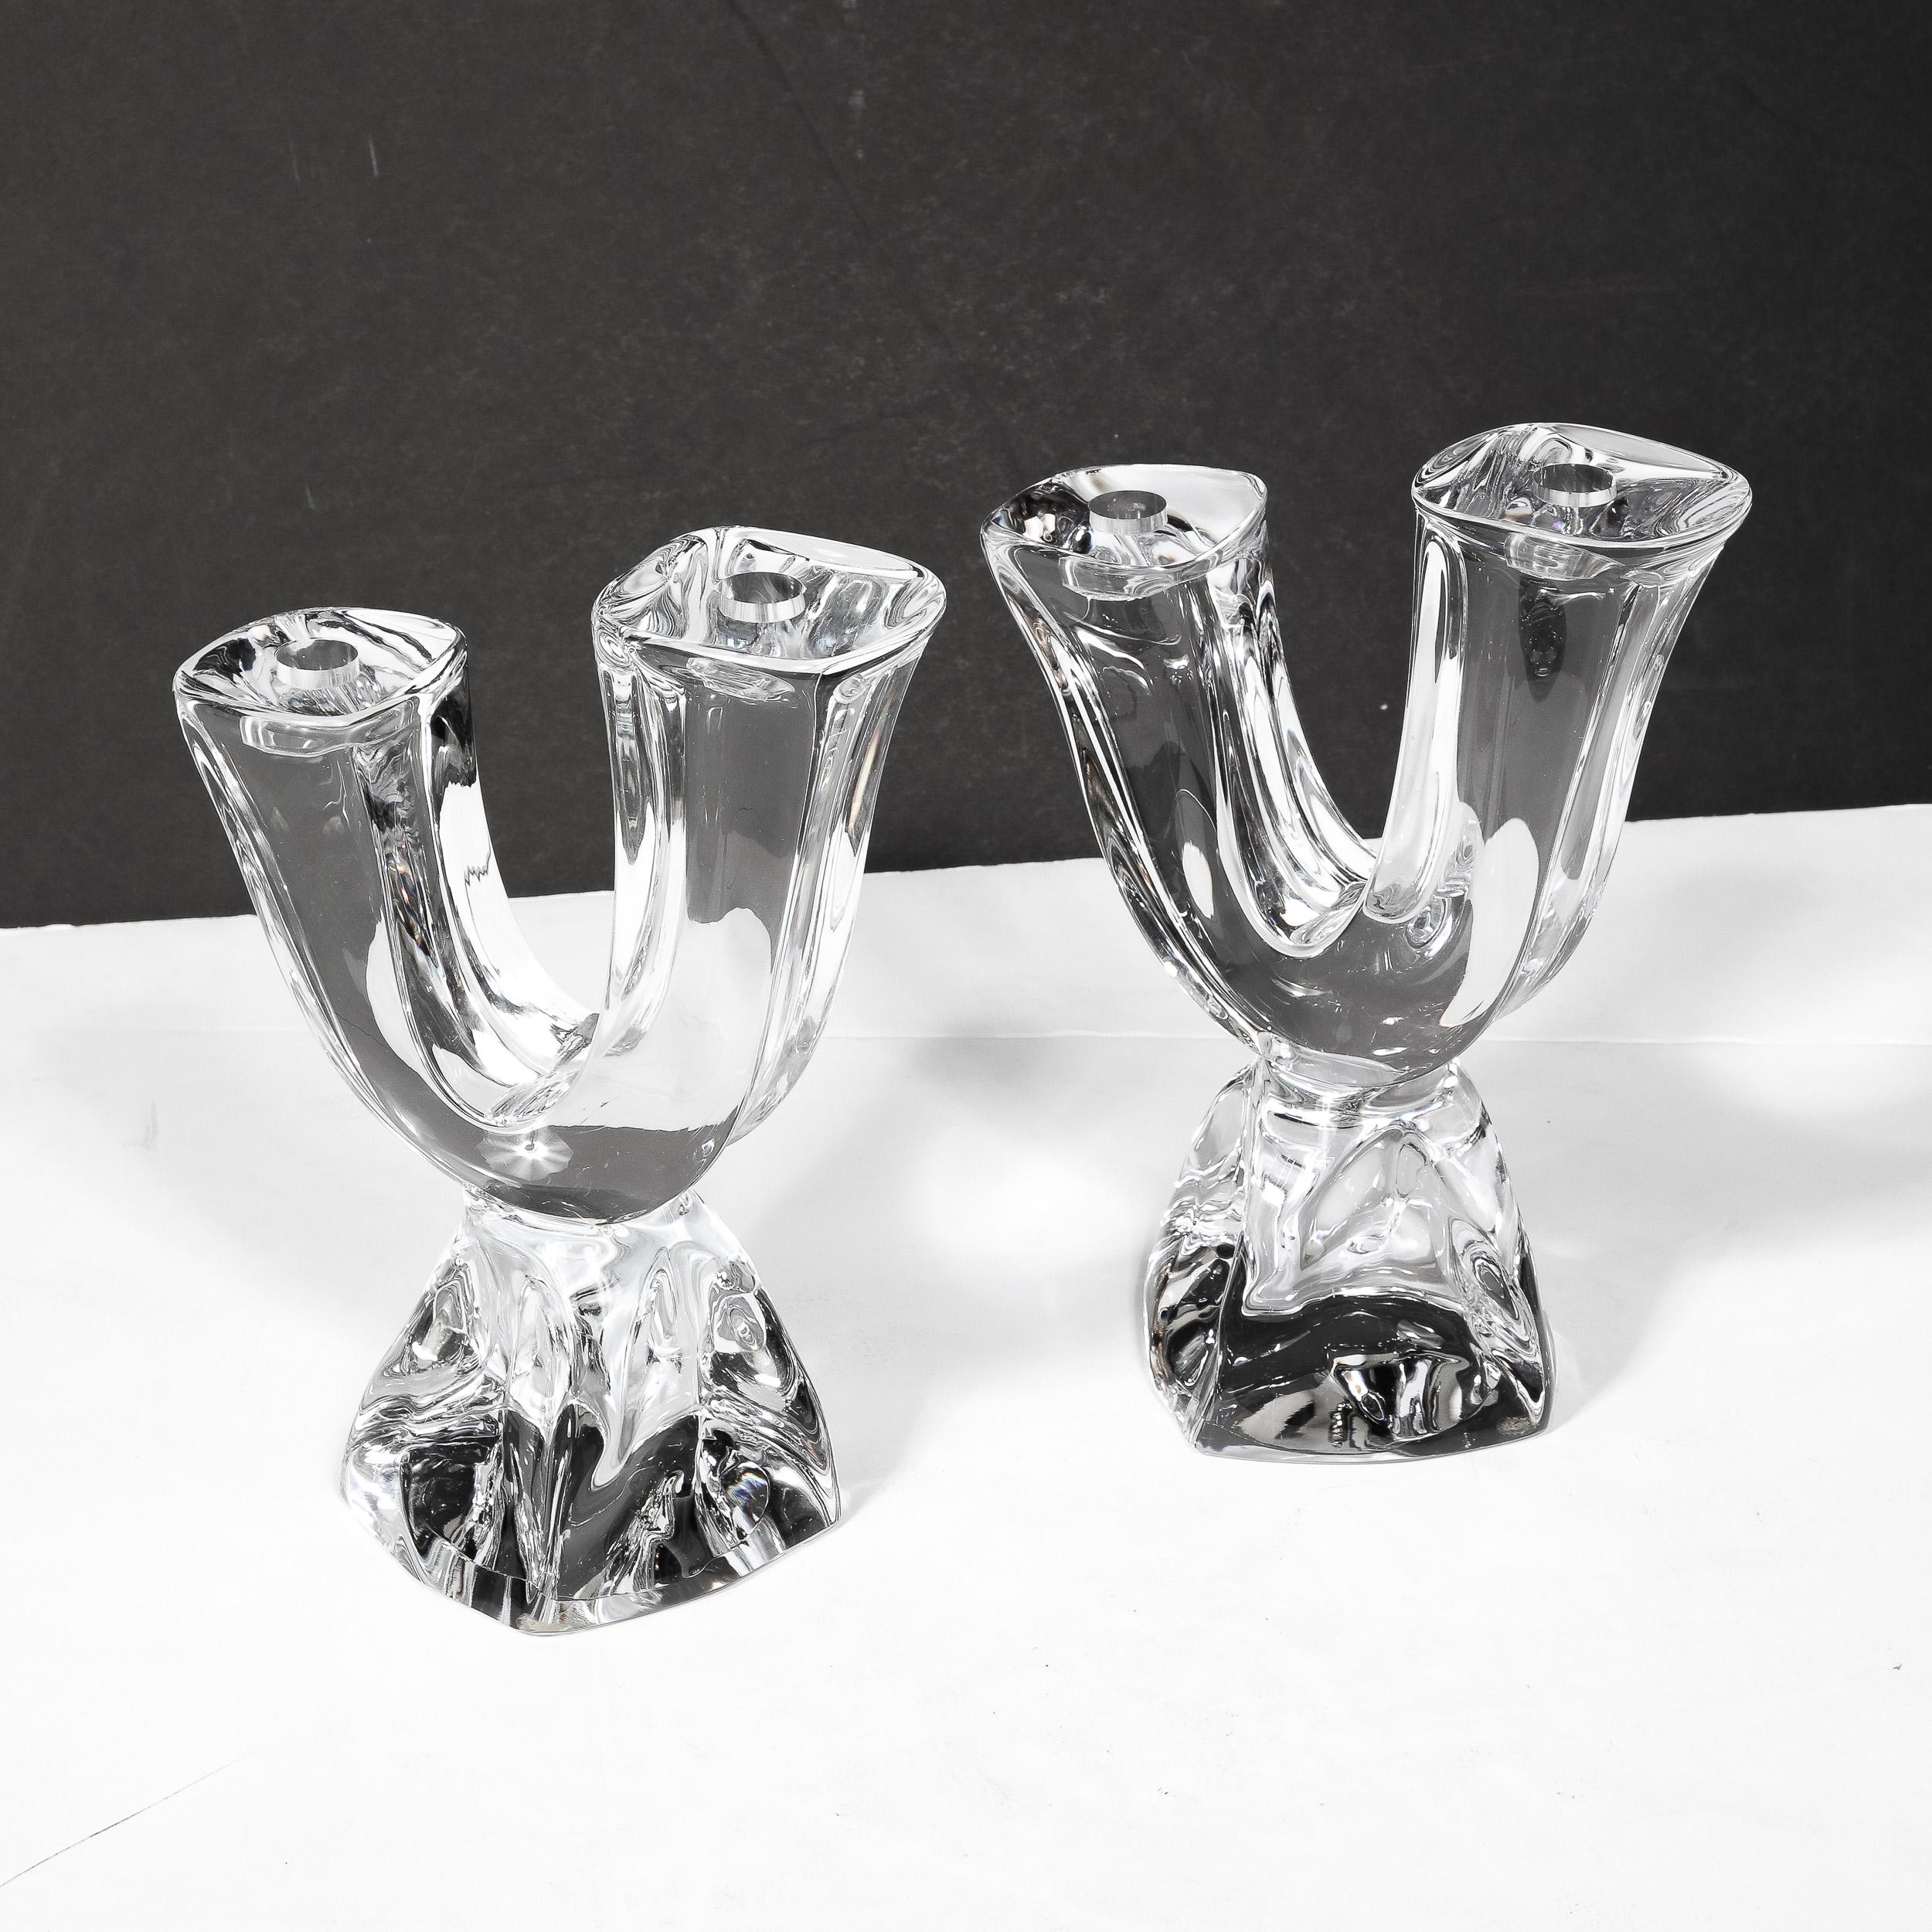 French Pair of Mid-Century Modernist Sculptural Crystal Candelabras signed Daum